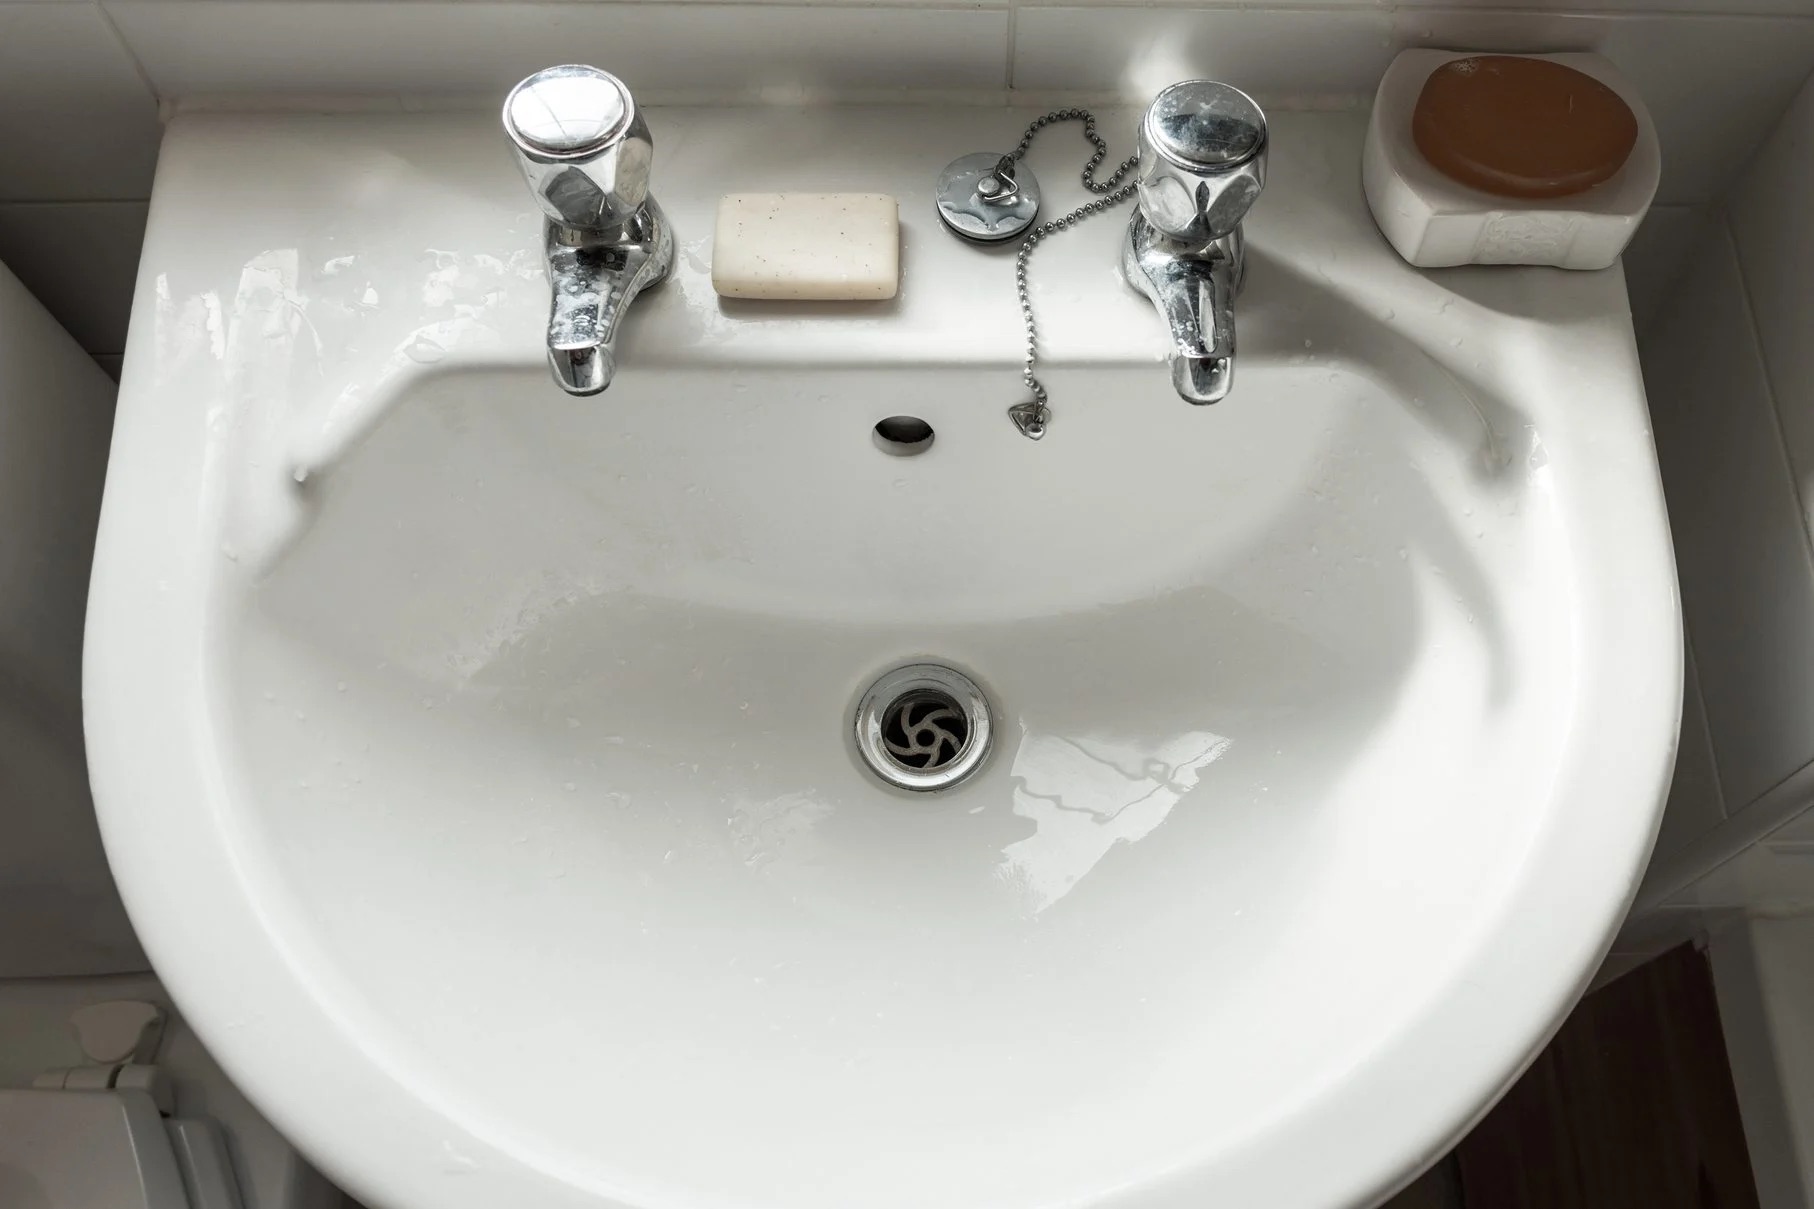 What Are The Plumbing Requirements For A Bathroom Sink